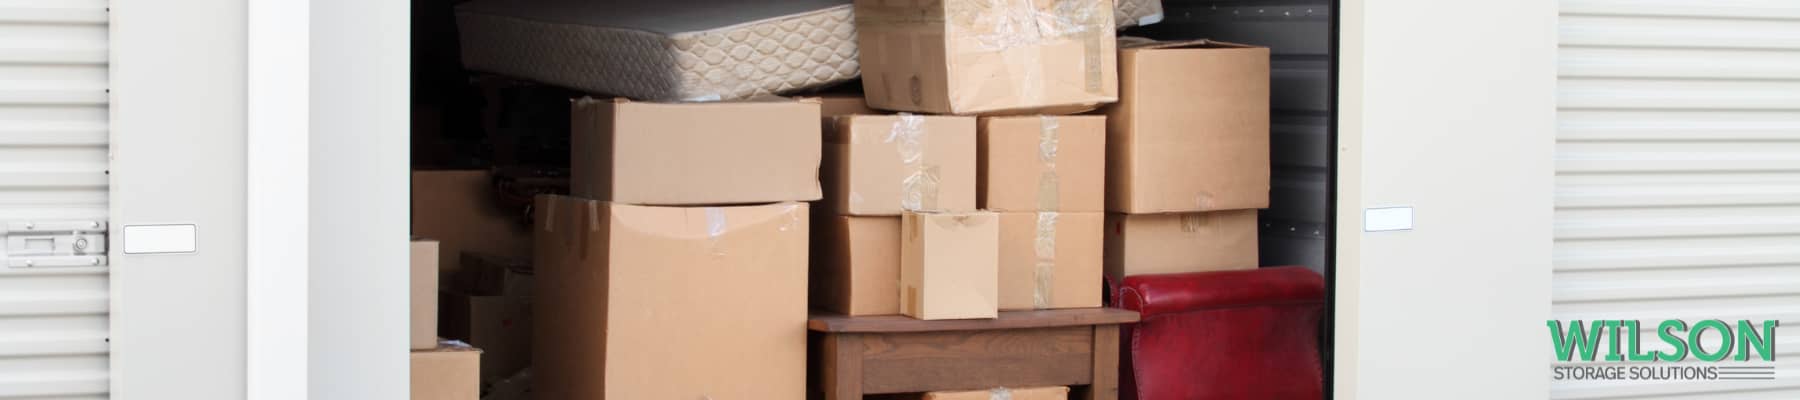 Image of boxes stacked in a storage unit